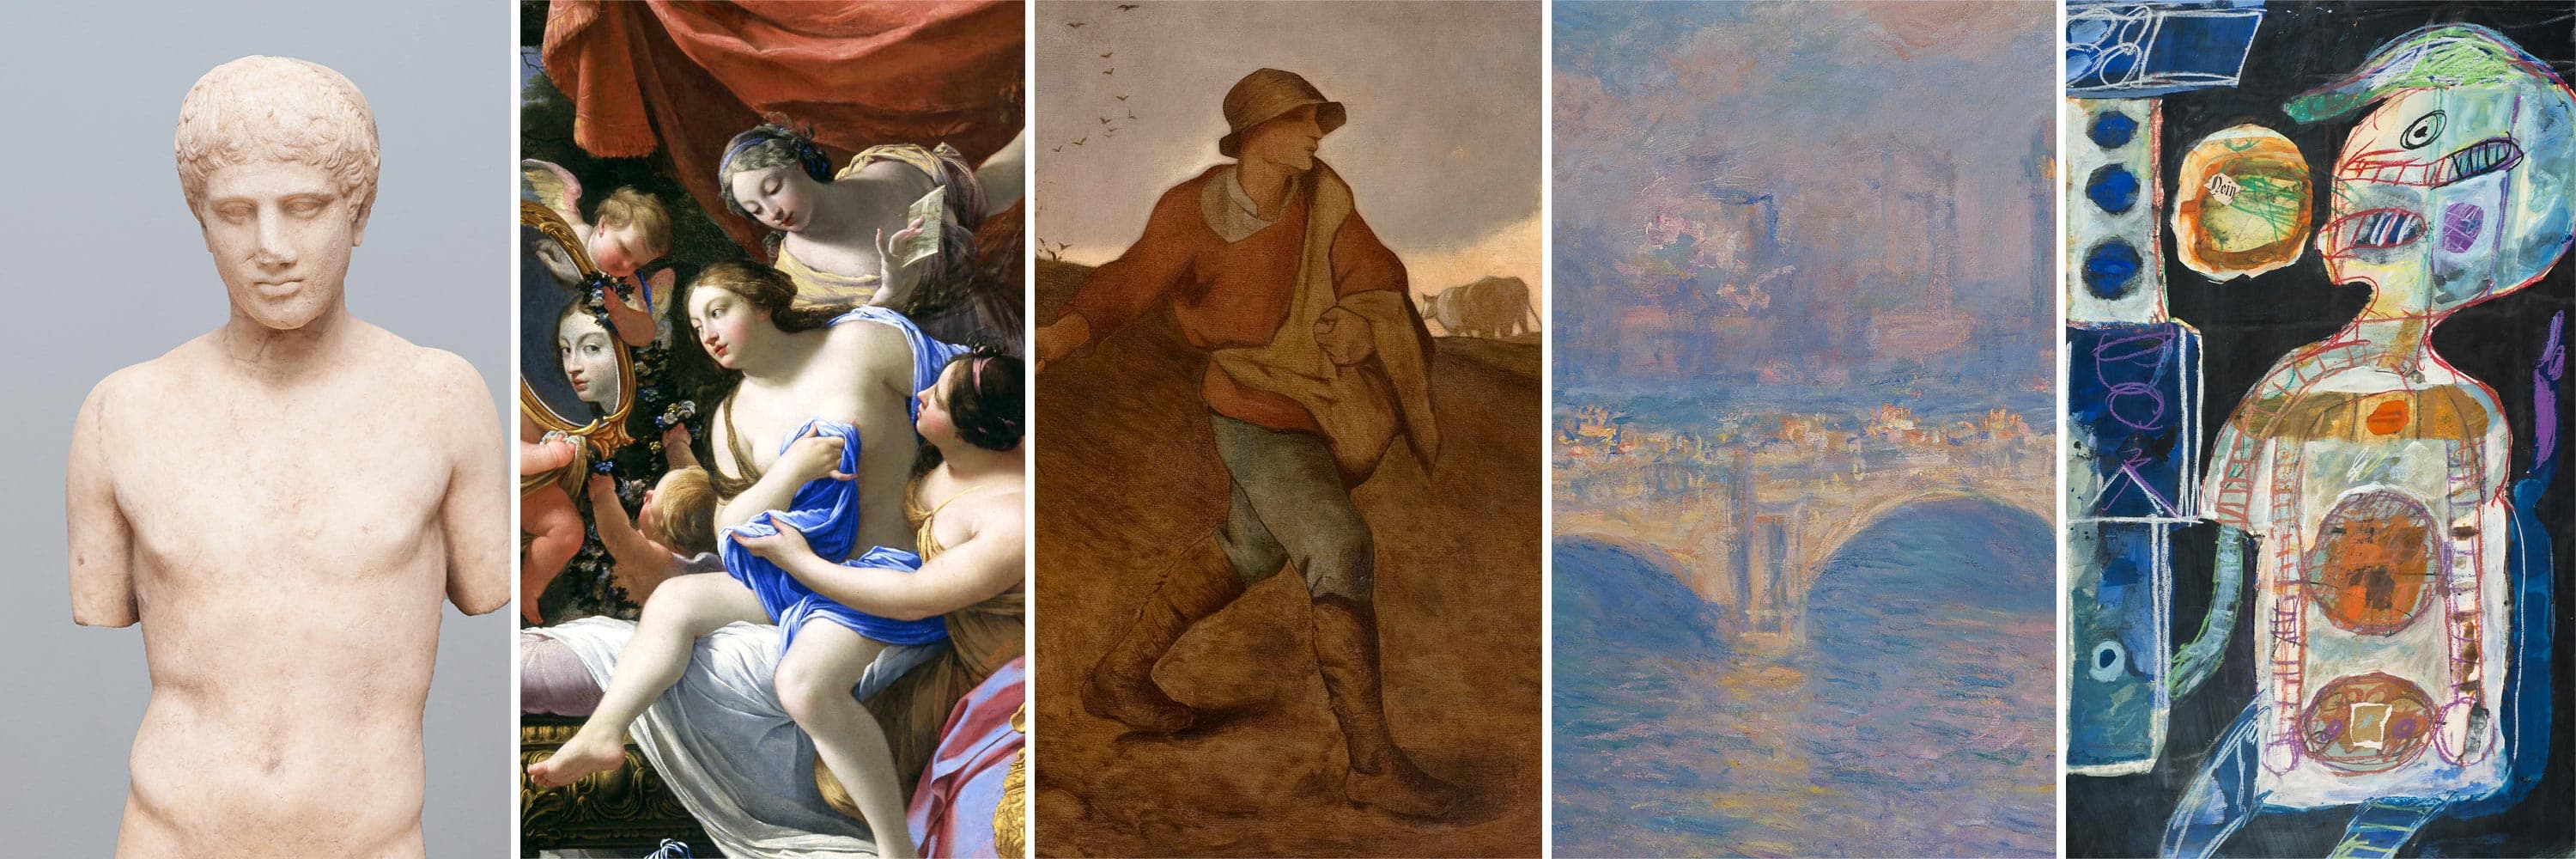 Five images, from left to right: the marble bust of a young man, a group of women and cherubs looking into a mirror, a person sowing seeds on a field, a hazy but colorful bridge with a city in the background, and a colorful face next to geometric shapes and lines.